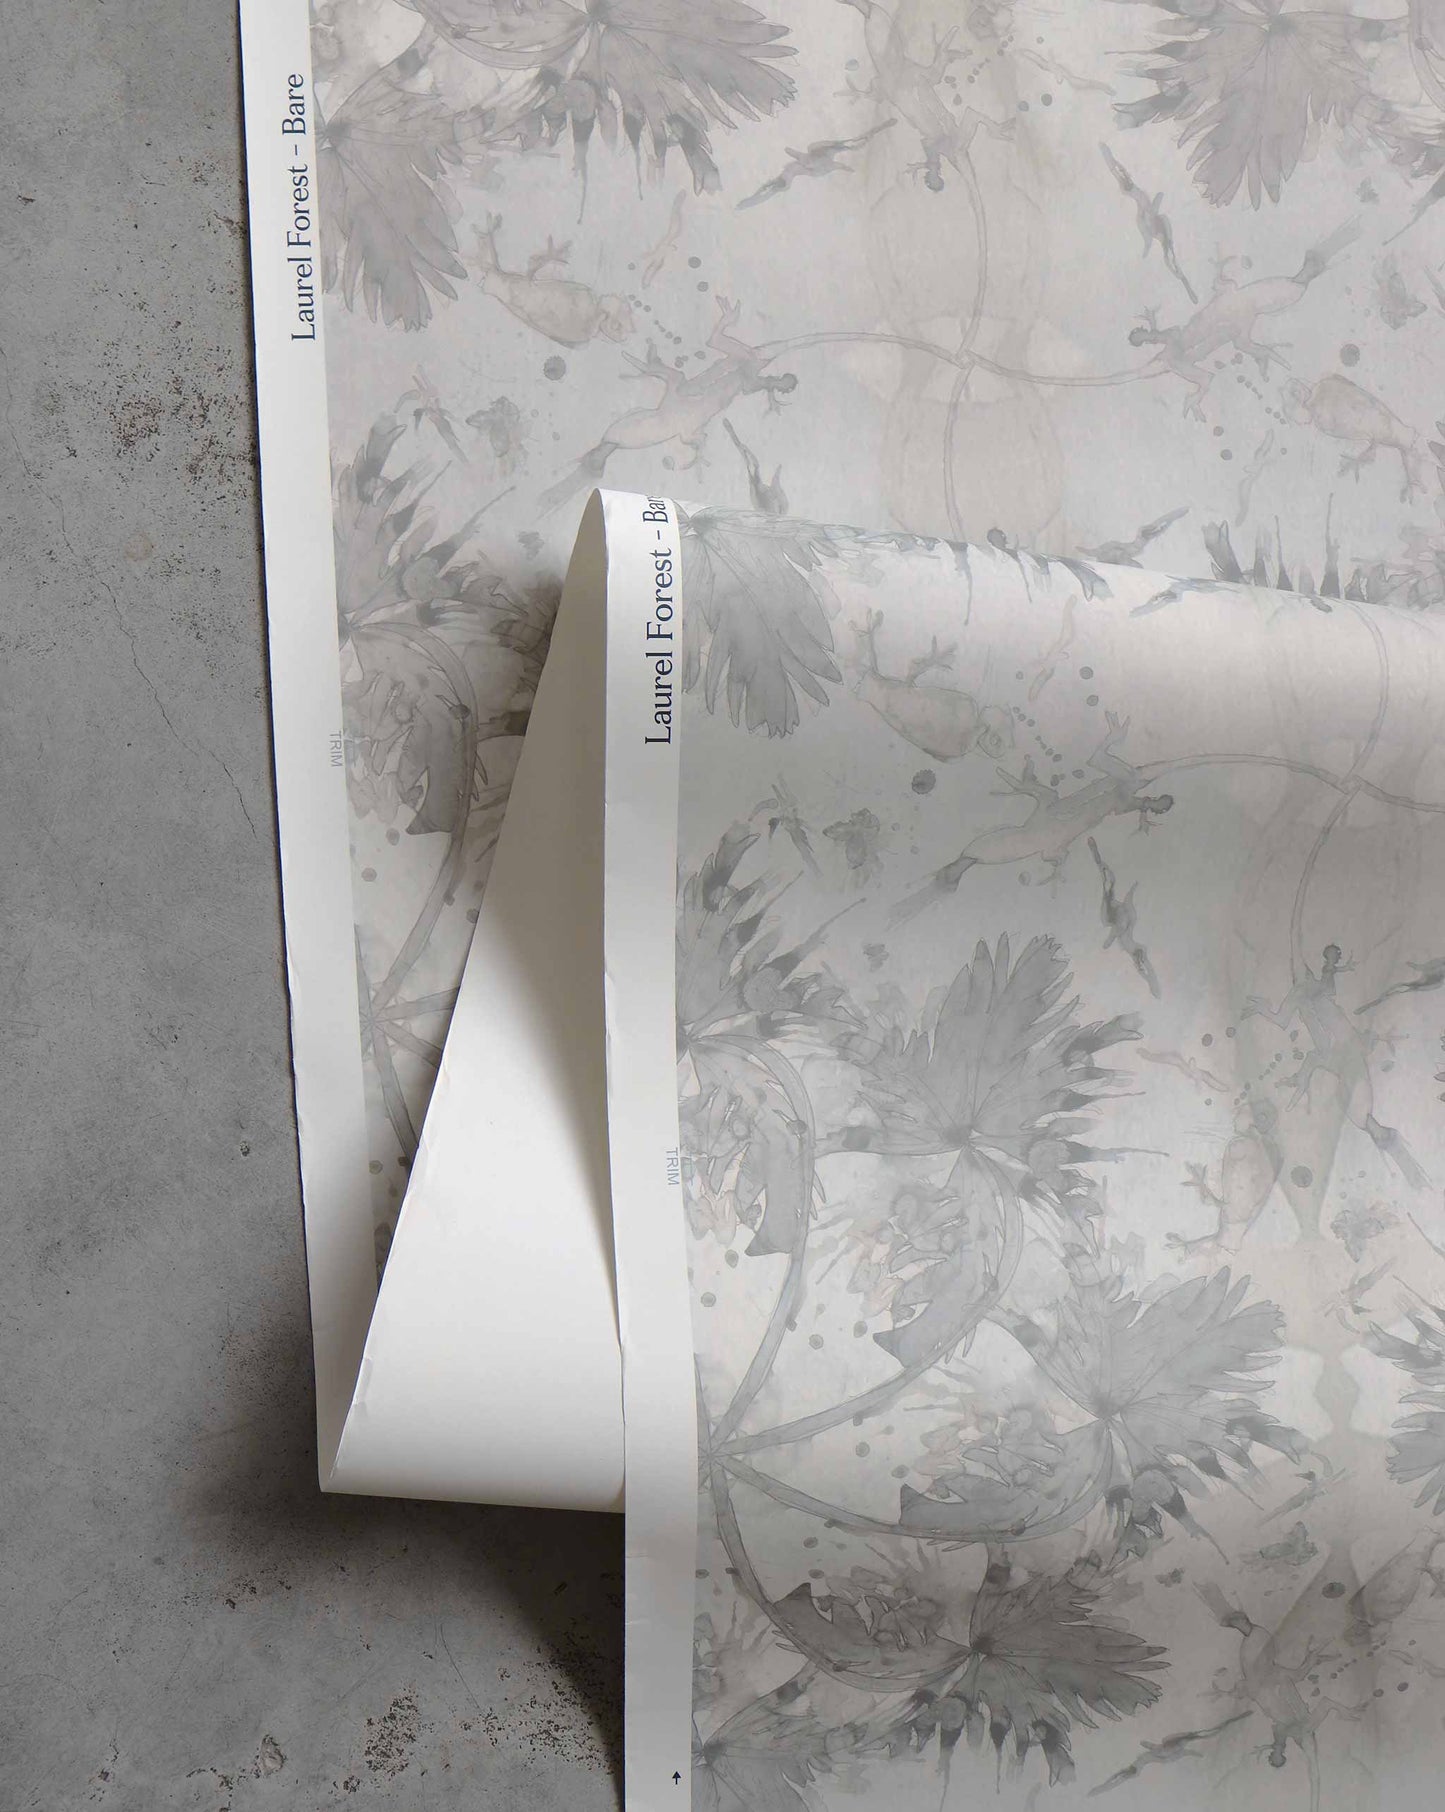 A close-up view of the high-end Laurel Forest Wallpaper in the "Bare" design, showcasing a subtle floral pattern in light grey tones on a light background, laid out on a grey surface. The luxurious fabric features a printed edge label "Laurel Forest, Bone.